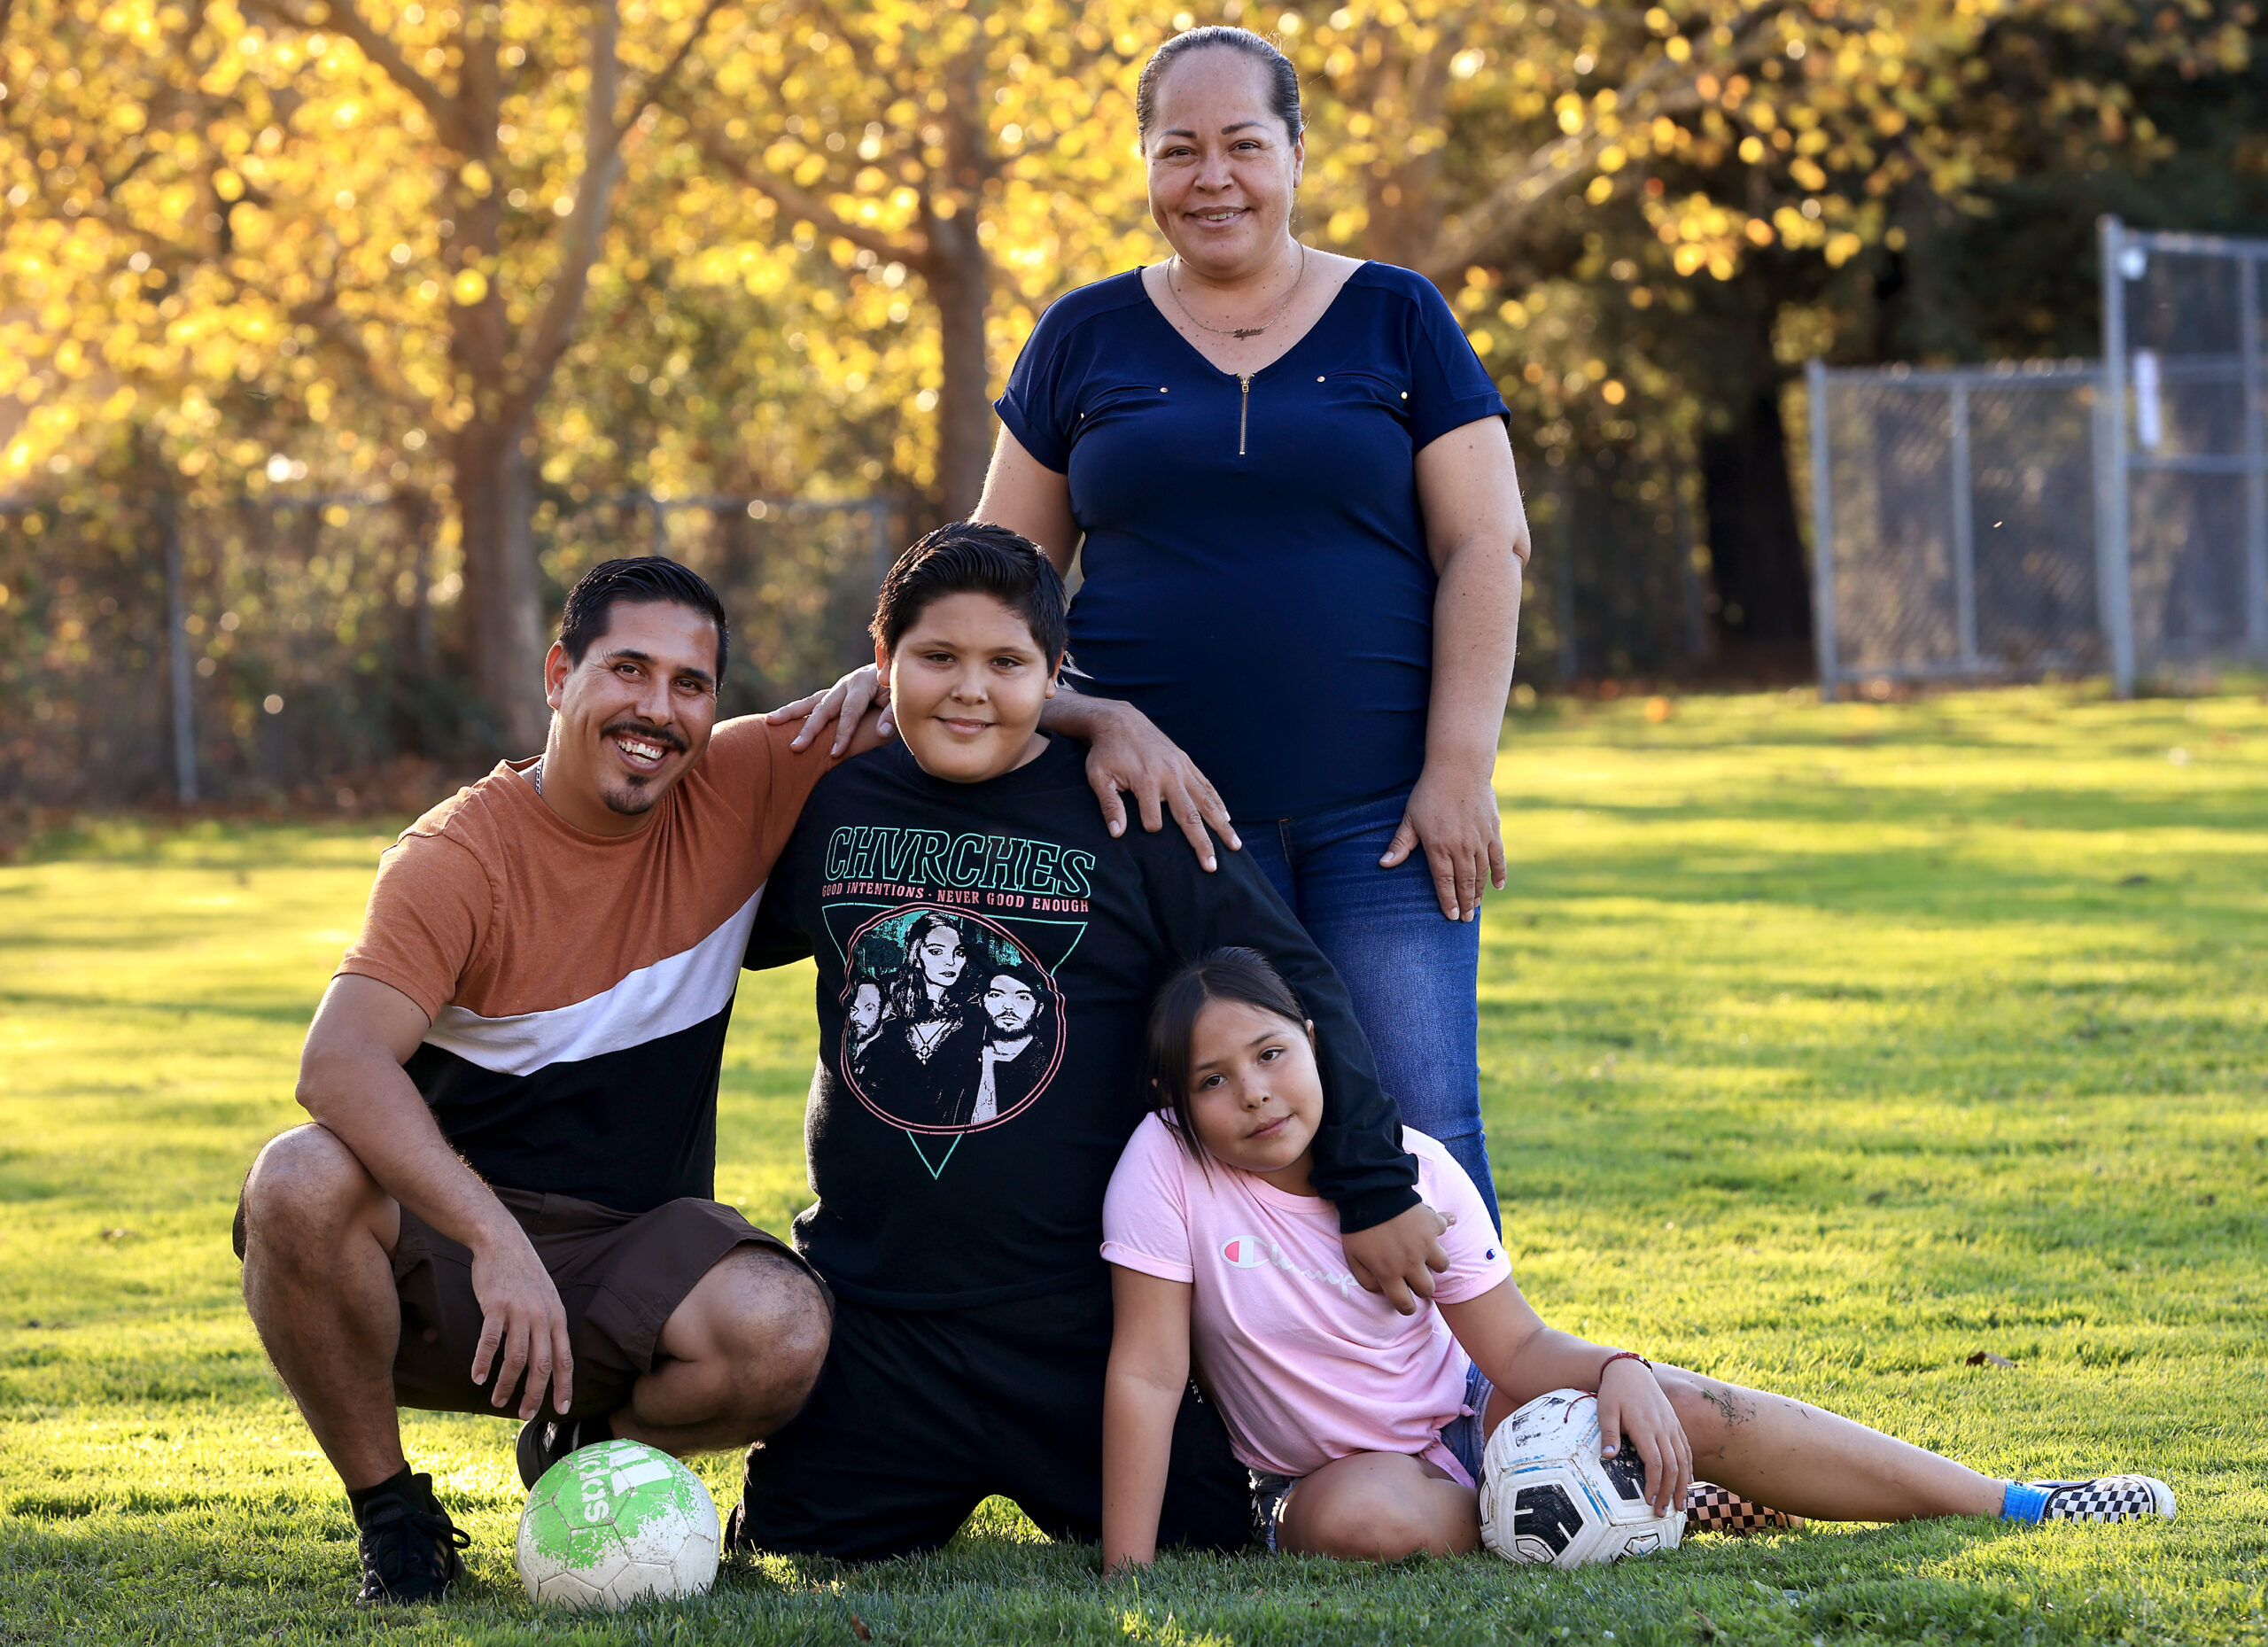 Adrian, 13, and his sister Angelique, 10, join their parents Julio Pena and Guadalupe Yesenia Espinoza for a family portrait, Wednesday, Nov. 16, 2022 in Healdsburg. The family was granted asylum, and drove through the border legally on Oct. 19 from Tepalcatepec, Michoacan in Mexico. . (Kent Porter / The Press Democrat) 2022